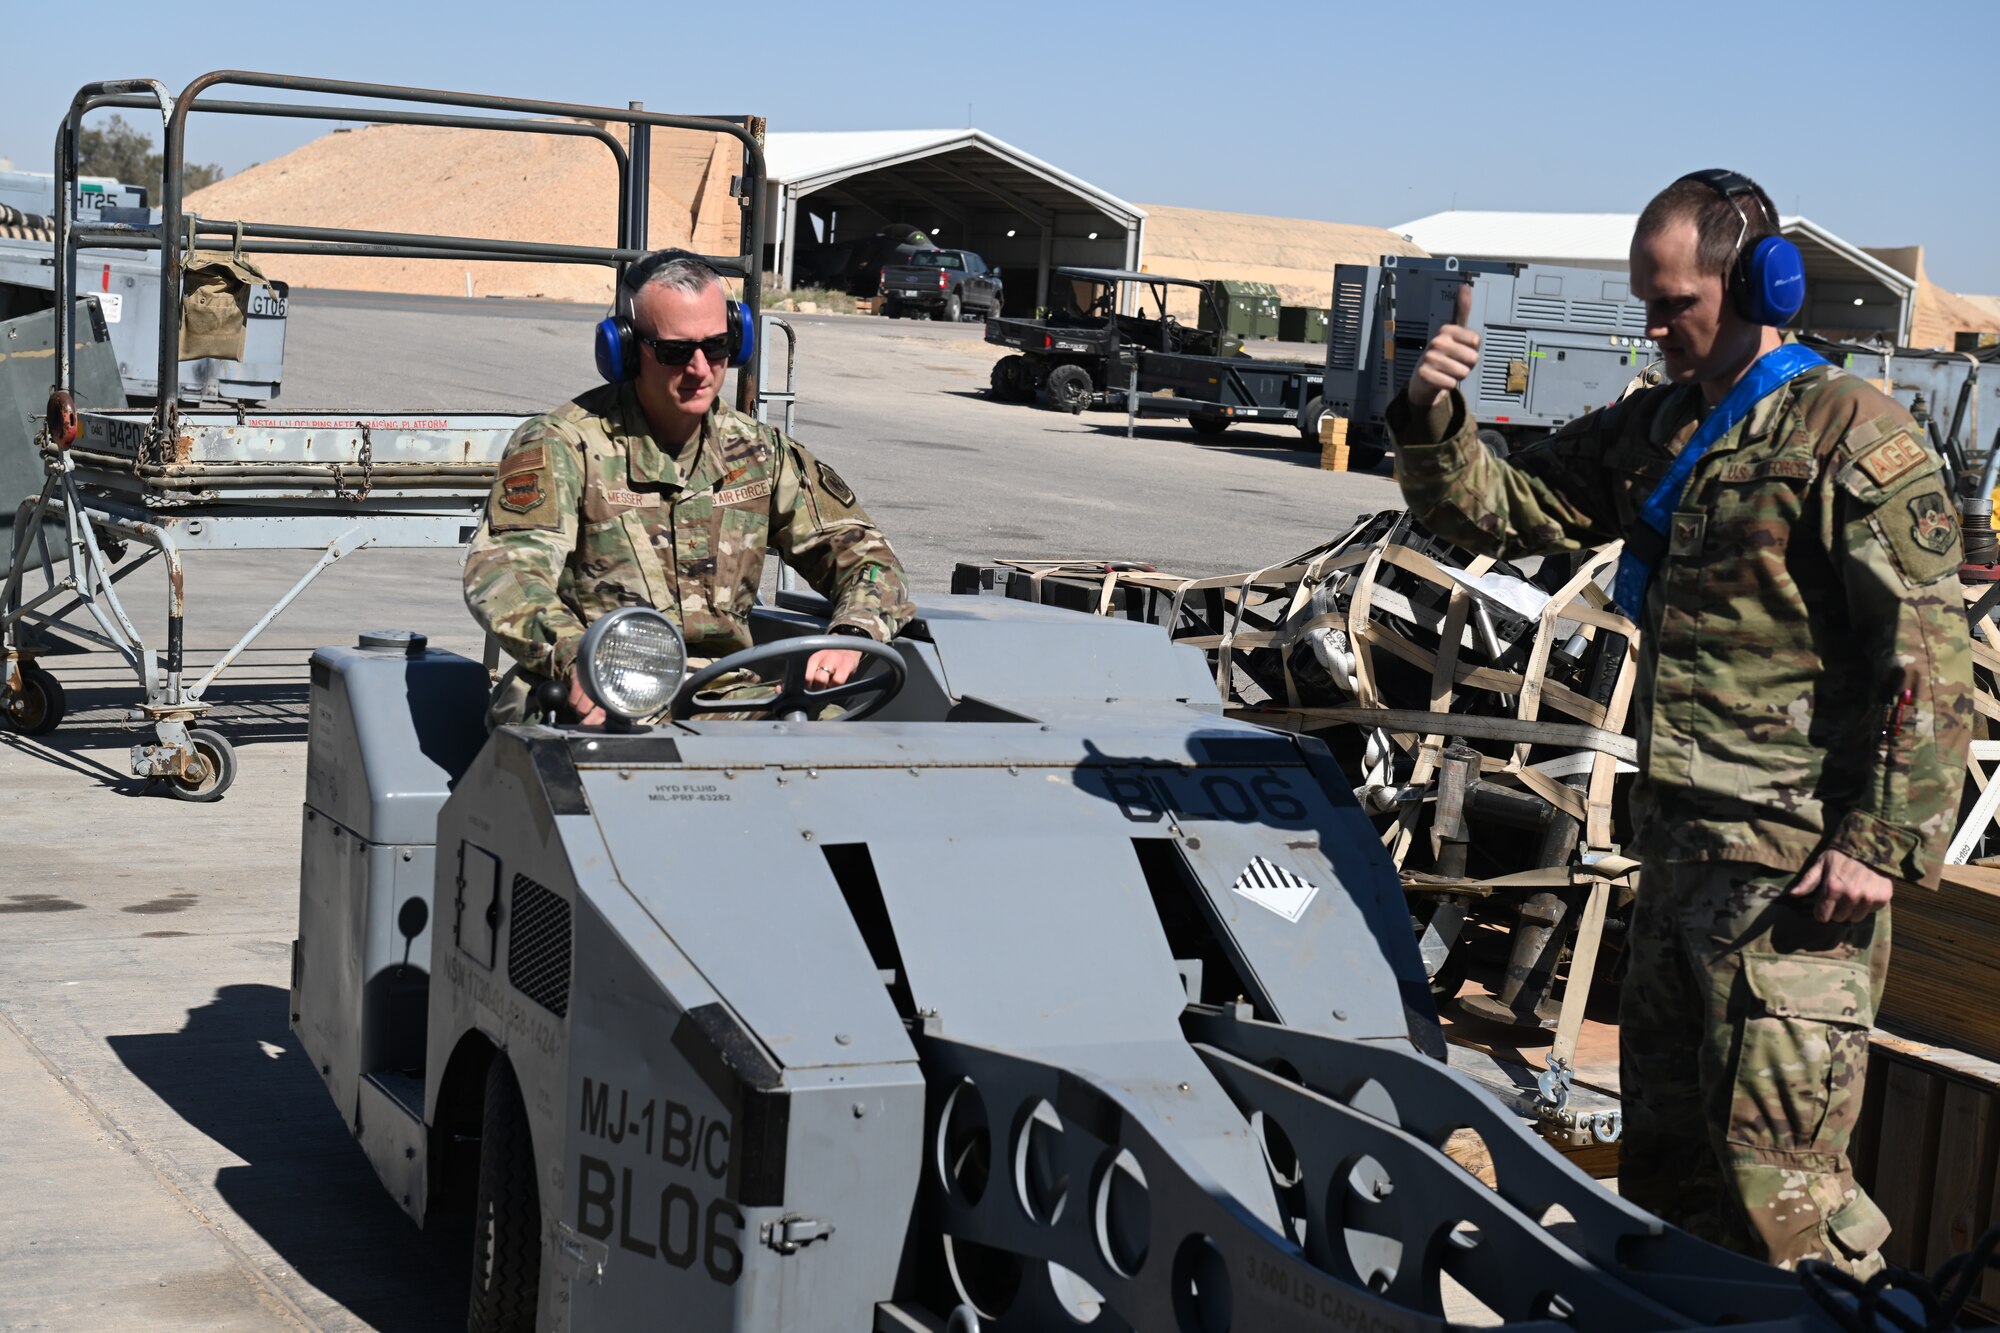 Members of the 332d Air Expeditionary Wing’s leadership team paid a visit to the 389th Expeditionary Maintenance Squadron to learn about the roles they perform in the fighter wing mission.